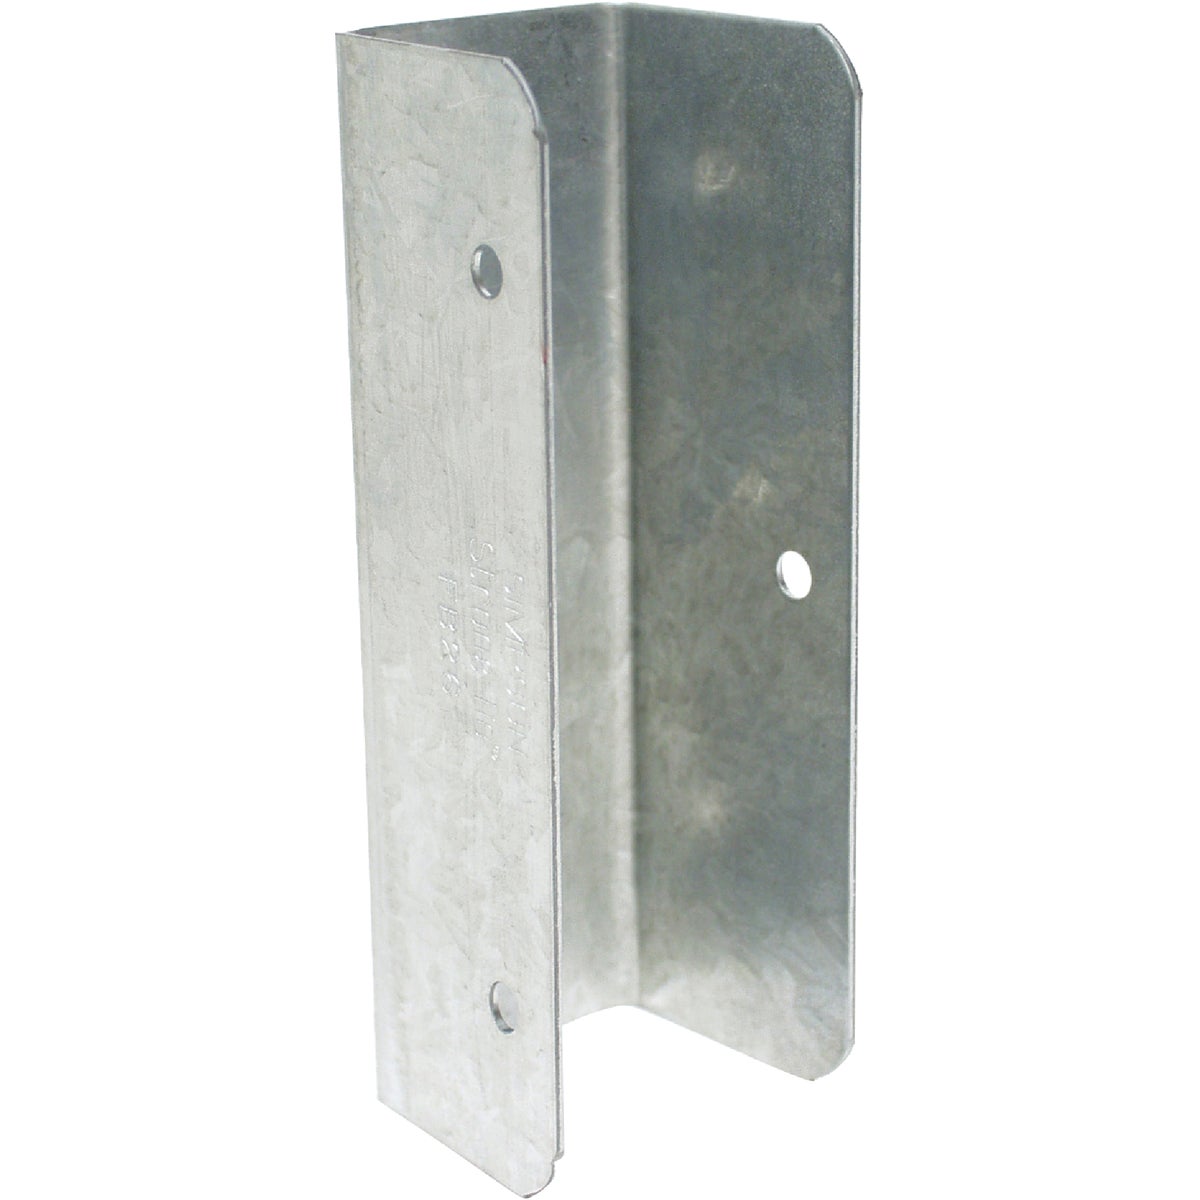 Item 100506, Simpson Strong-Tie fence brackets make the connection between fence rails 